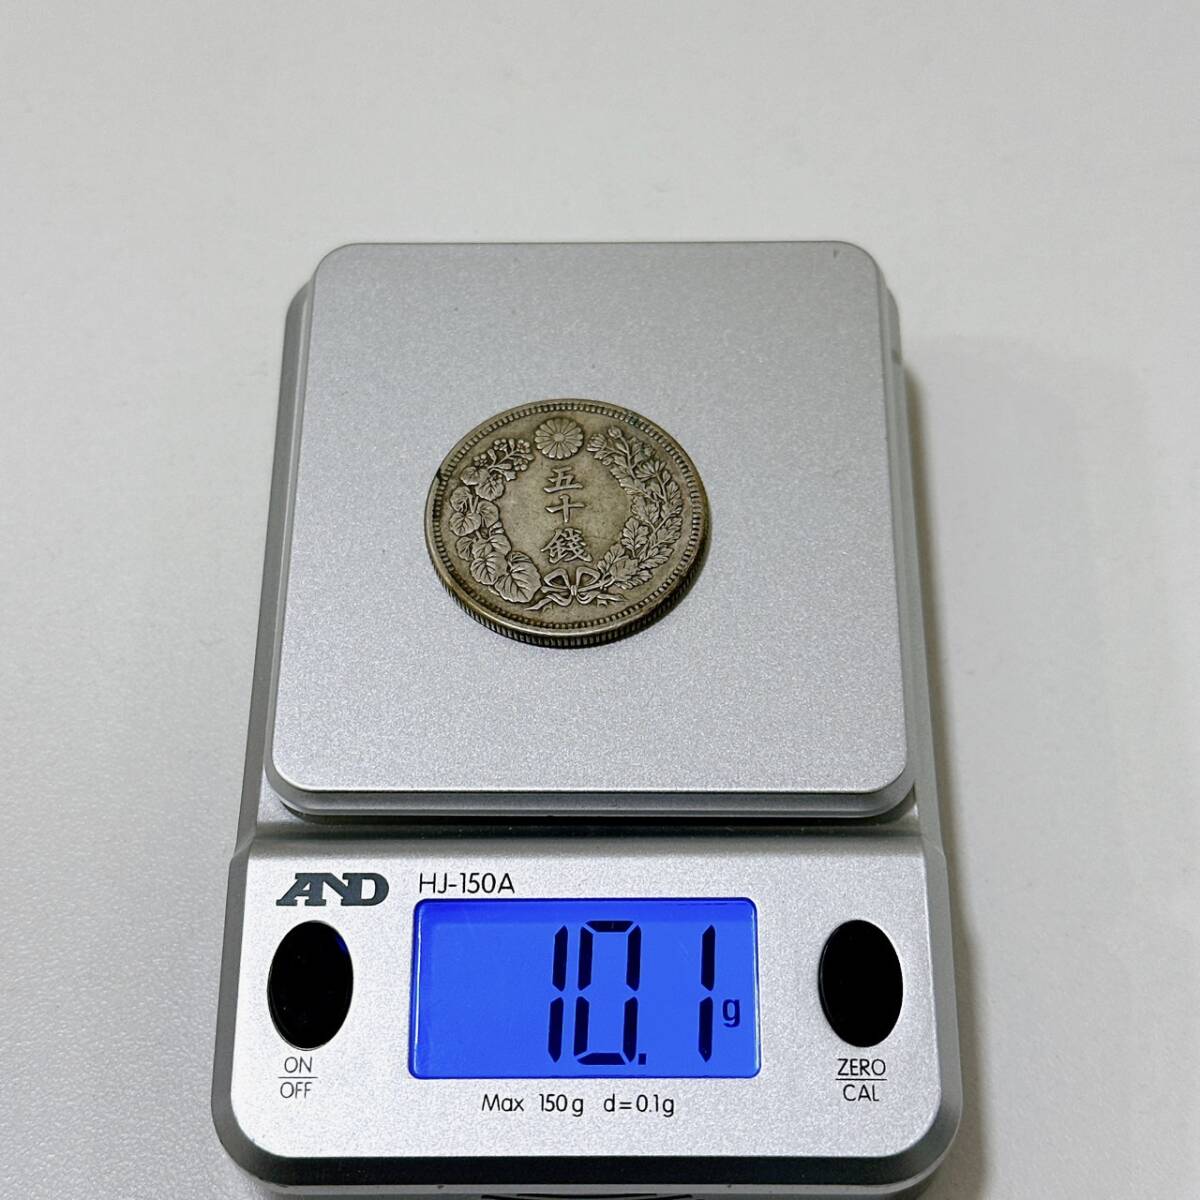 [TOA-5125a] 1 jpy ~ silver coin summarize large amount 50 sen dragon 50 sen asahi day 50 sen old coin through . money gross weight approximately 53.5g total 6 point Japan Meiji Showa era large small size present condition storage goods 